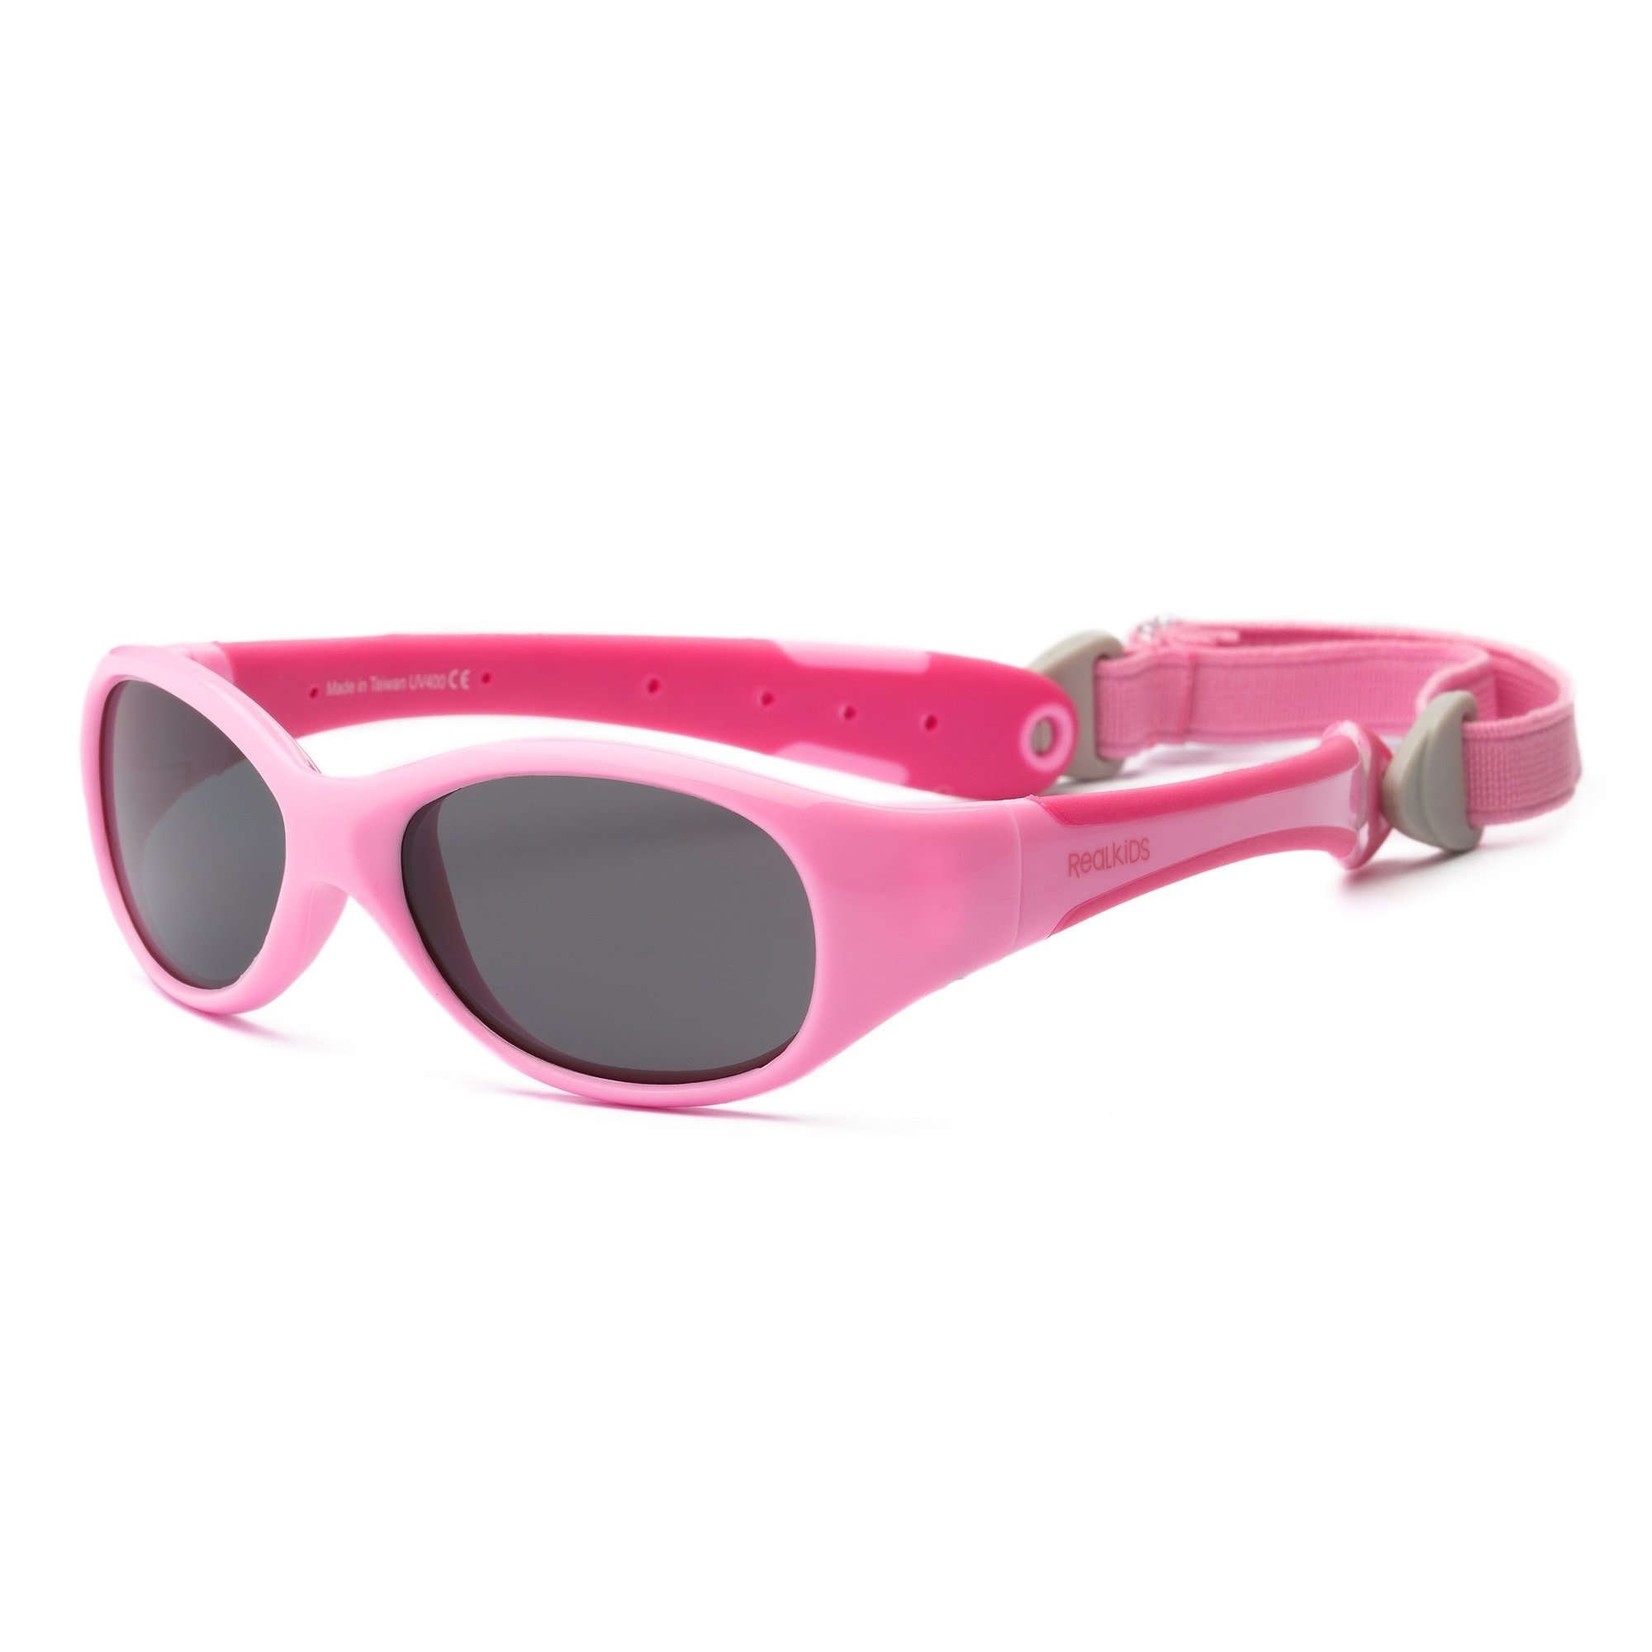 Real Shades REAL SHADES - Children's sunglasses with elastic strap 'Explorer' - Rose